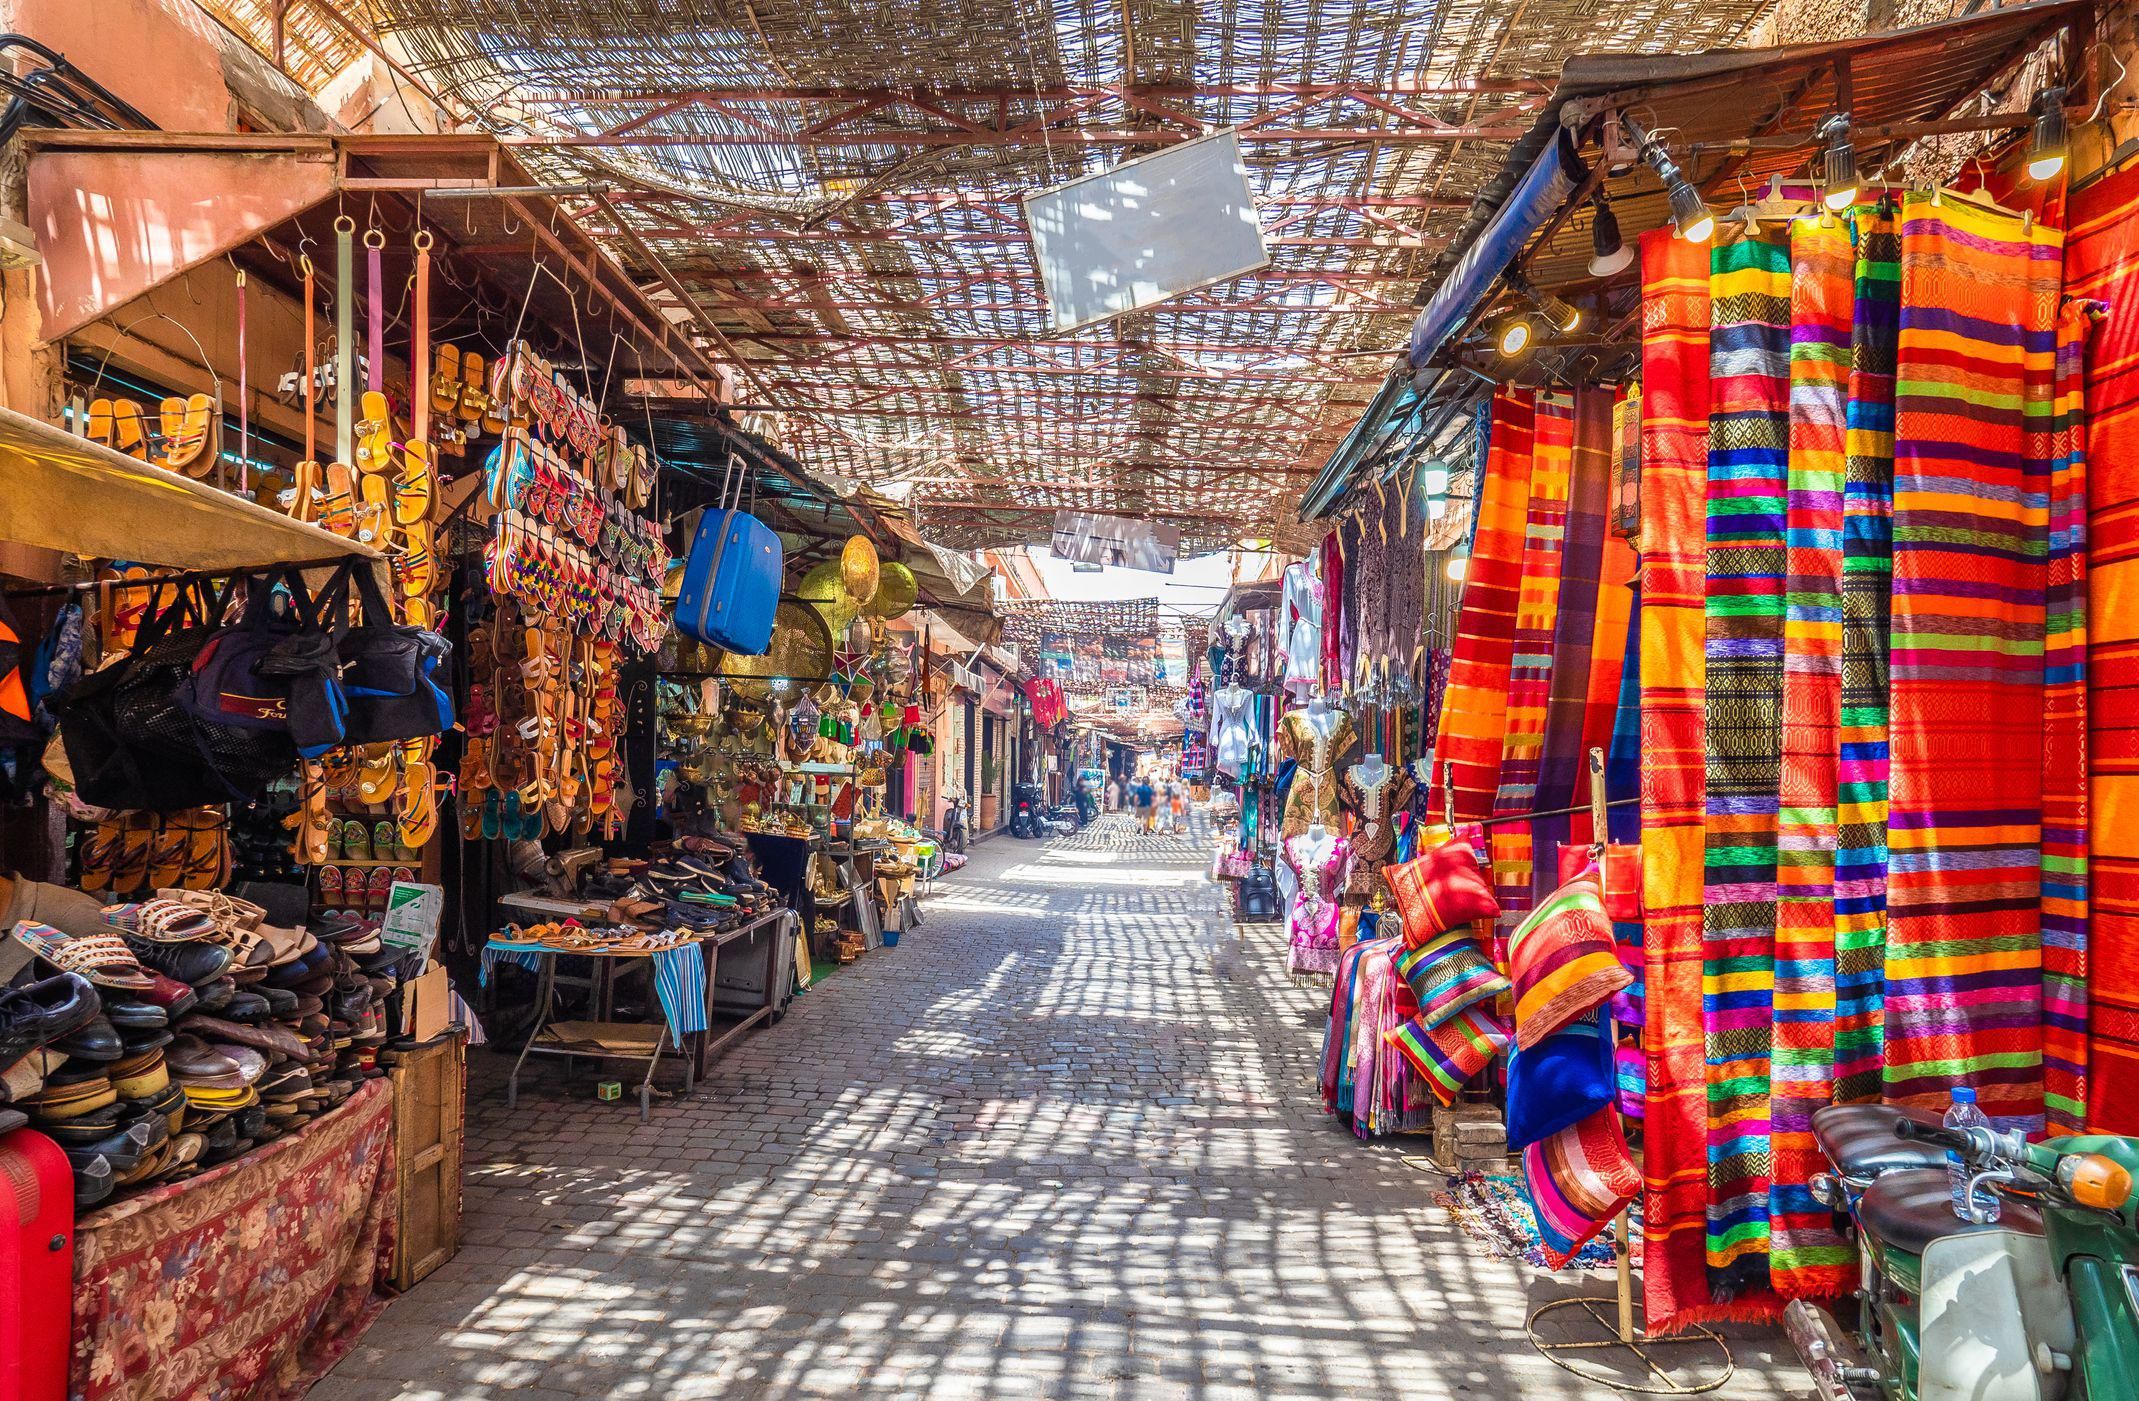 The fascinating Souks: shopping in Marrakech